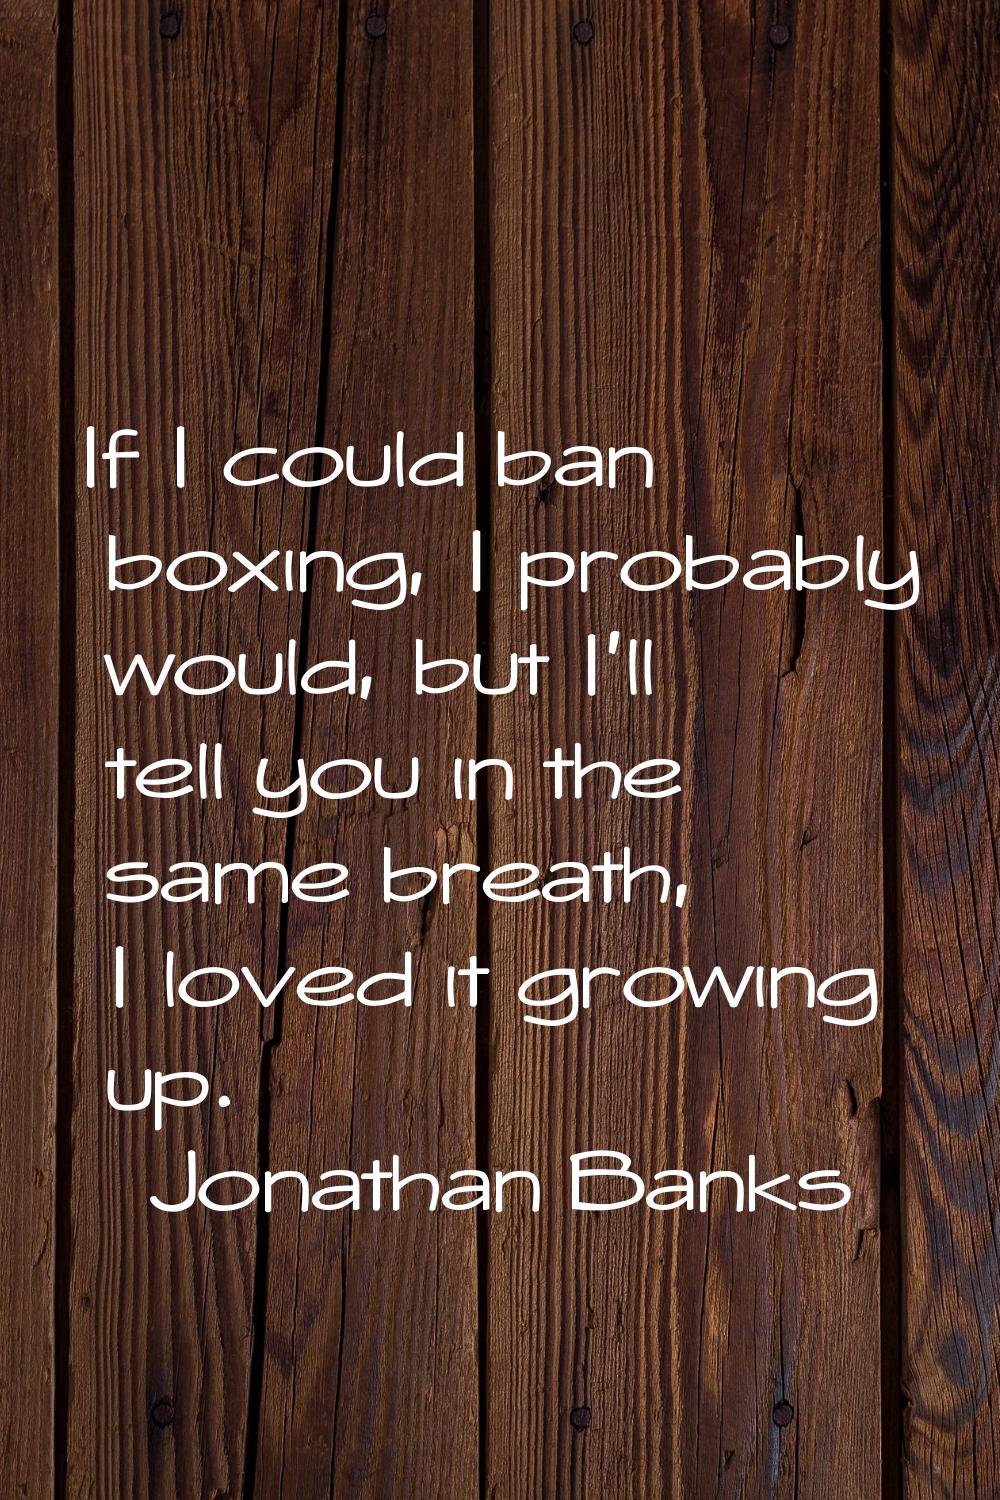 If I could ban boxing, I probably would, but I'll tell you in the same breath, I loved it growing u